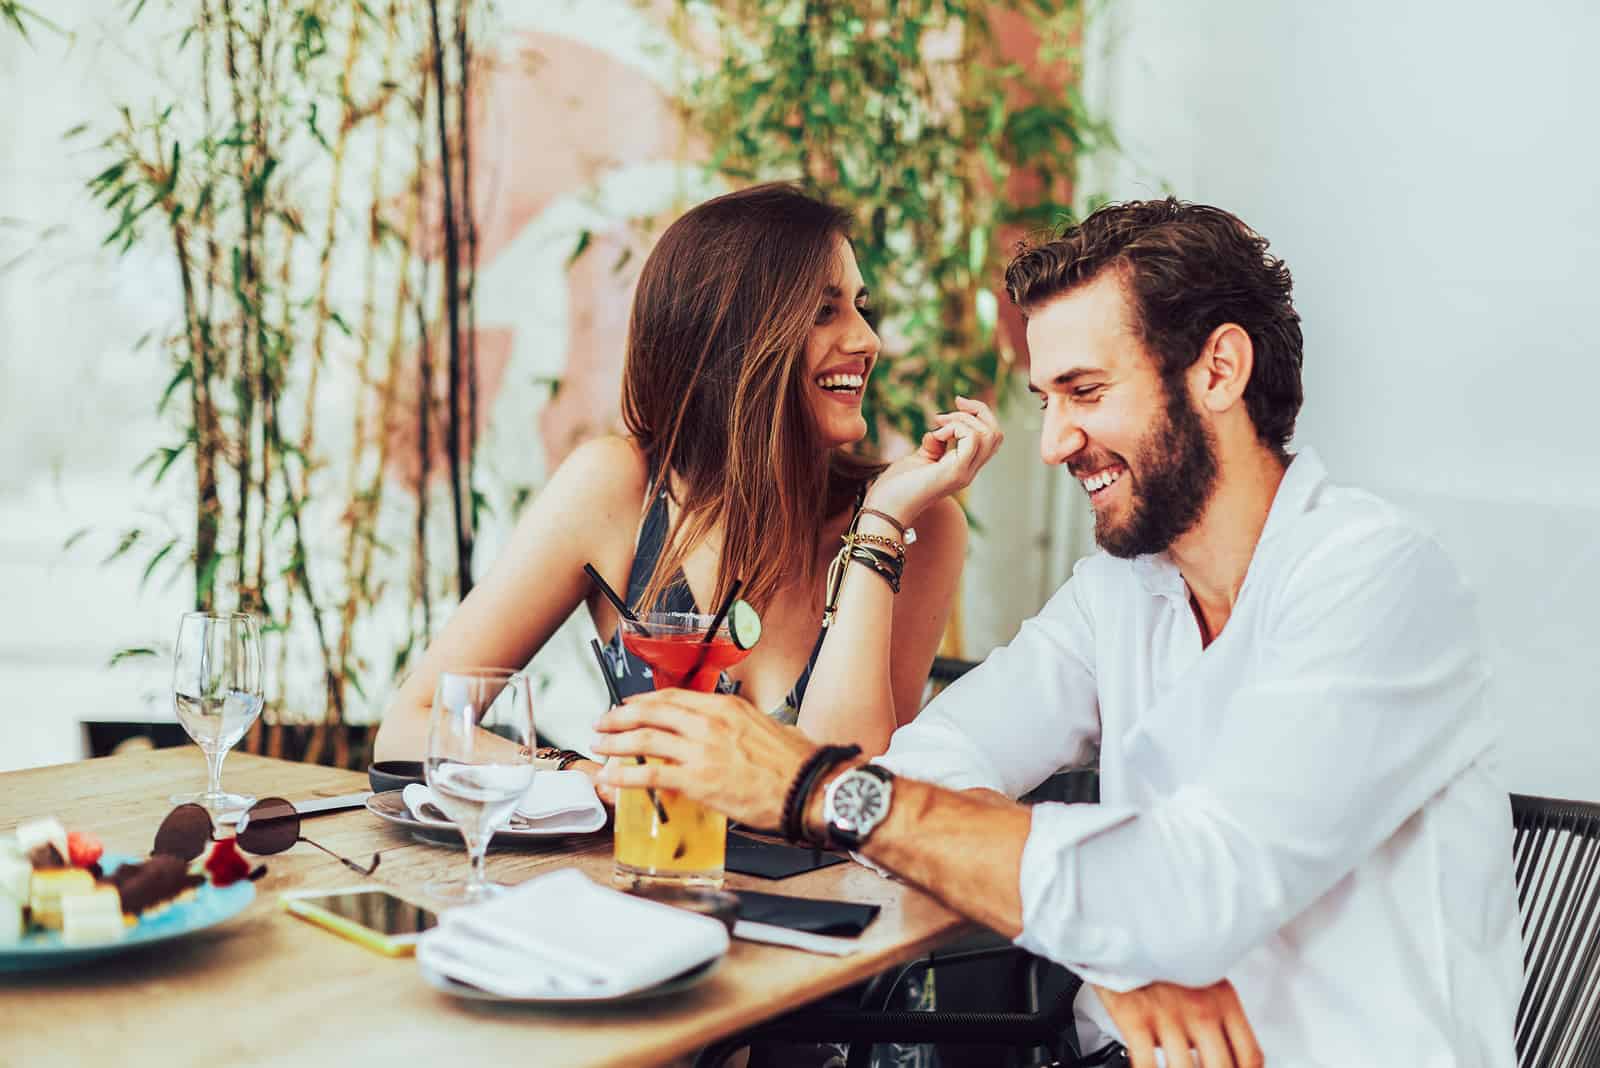 When A Man Avoids Eye Contact With A Woman: 8 Signs And Symptoms